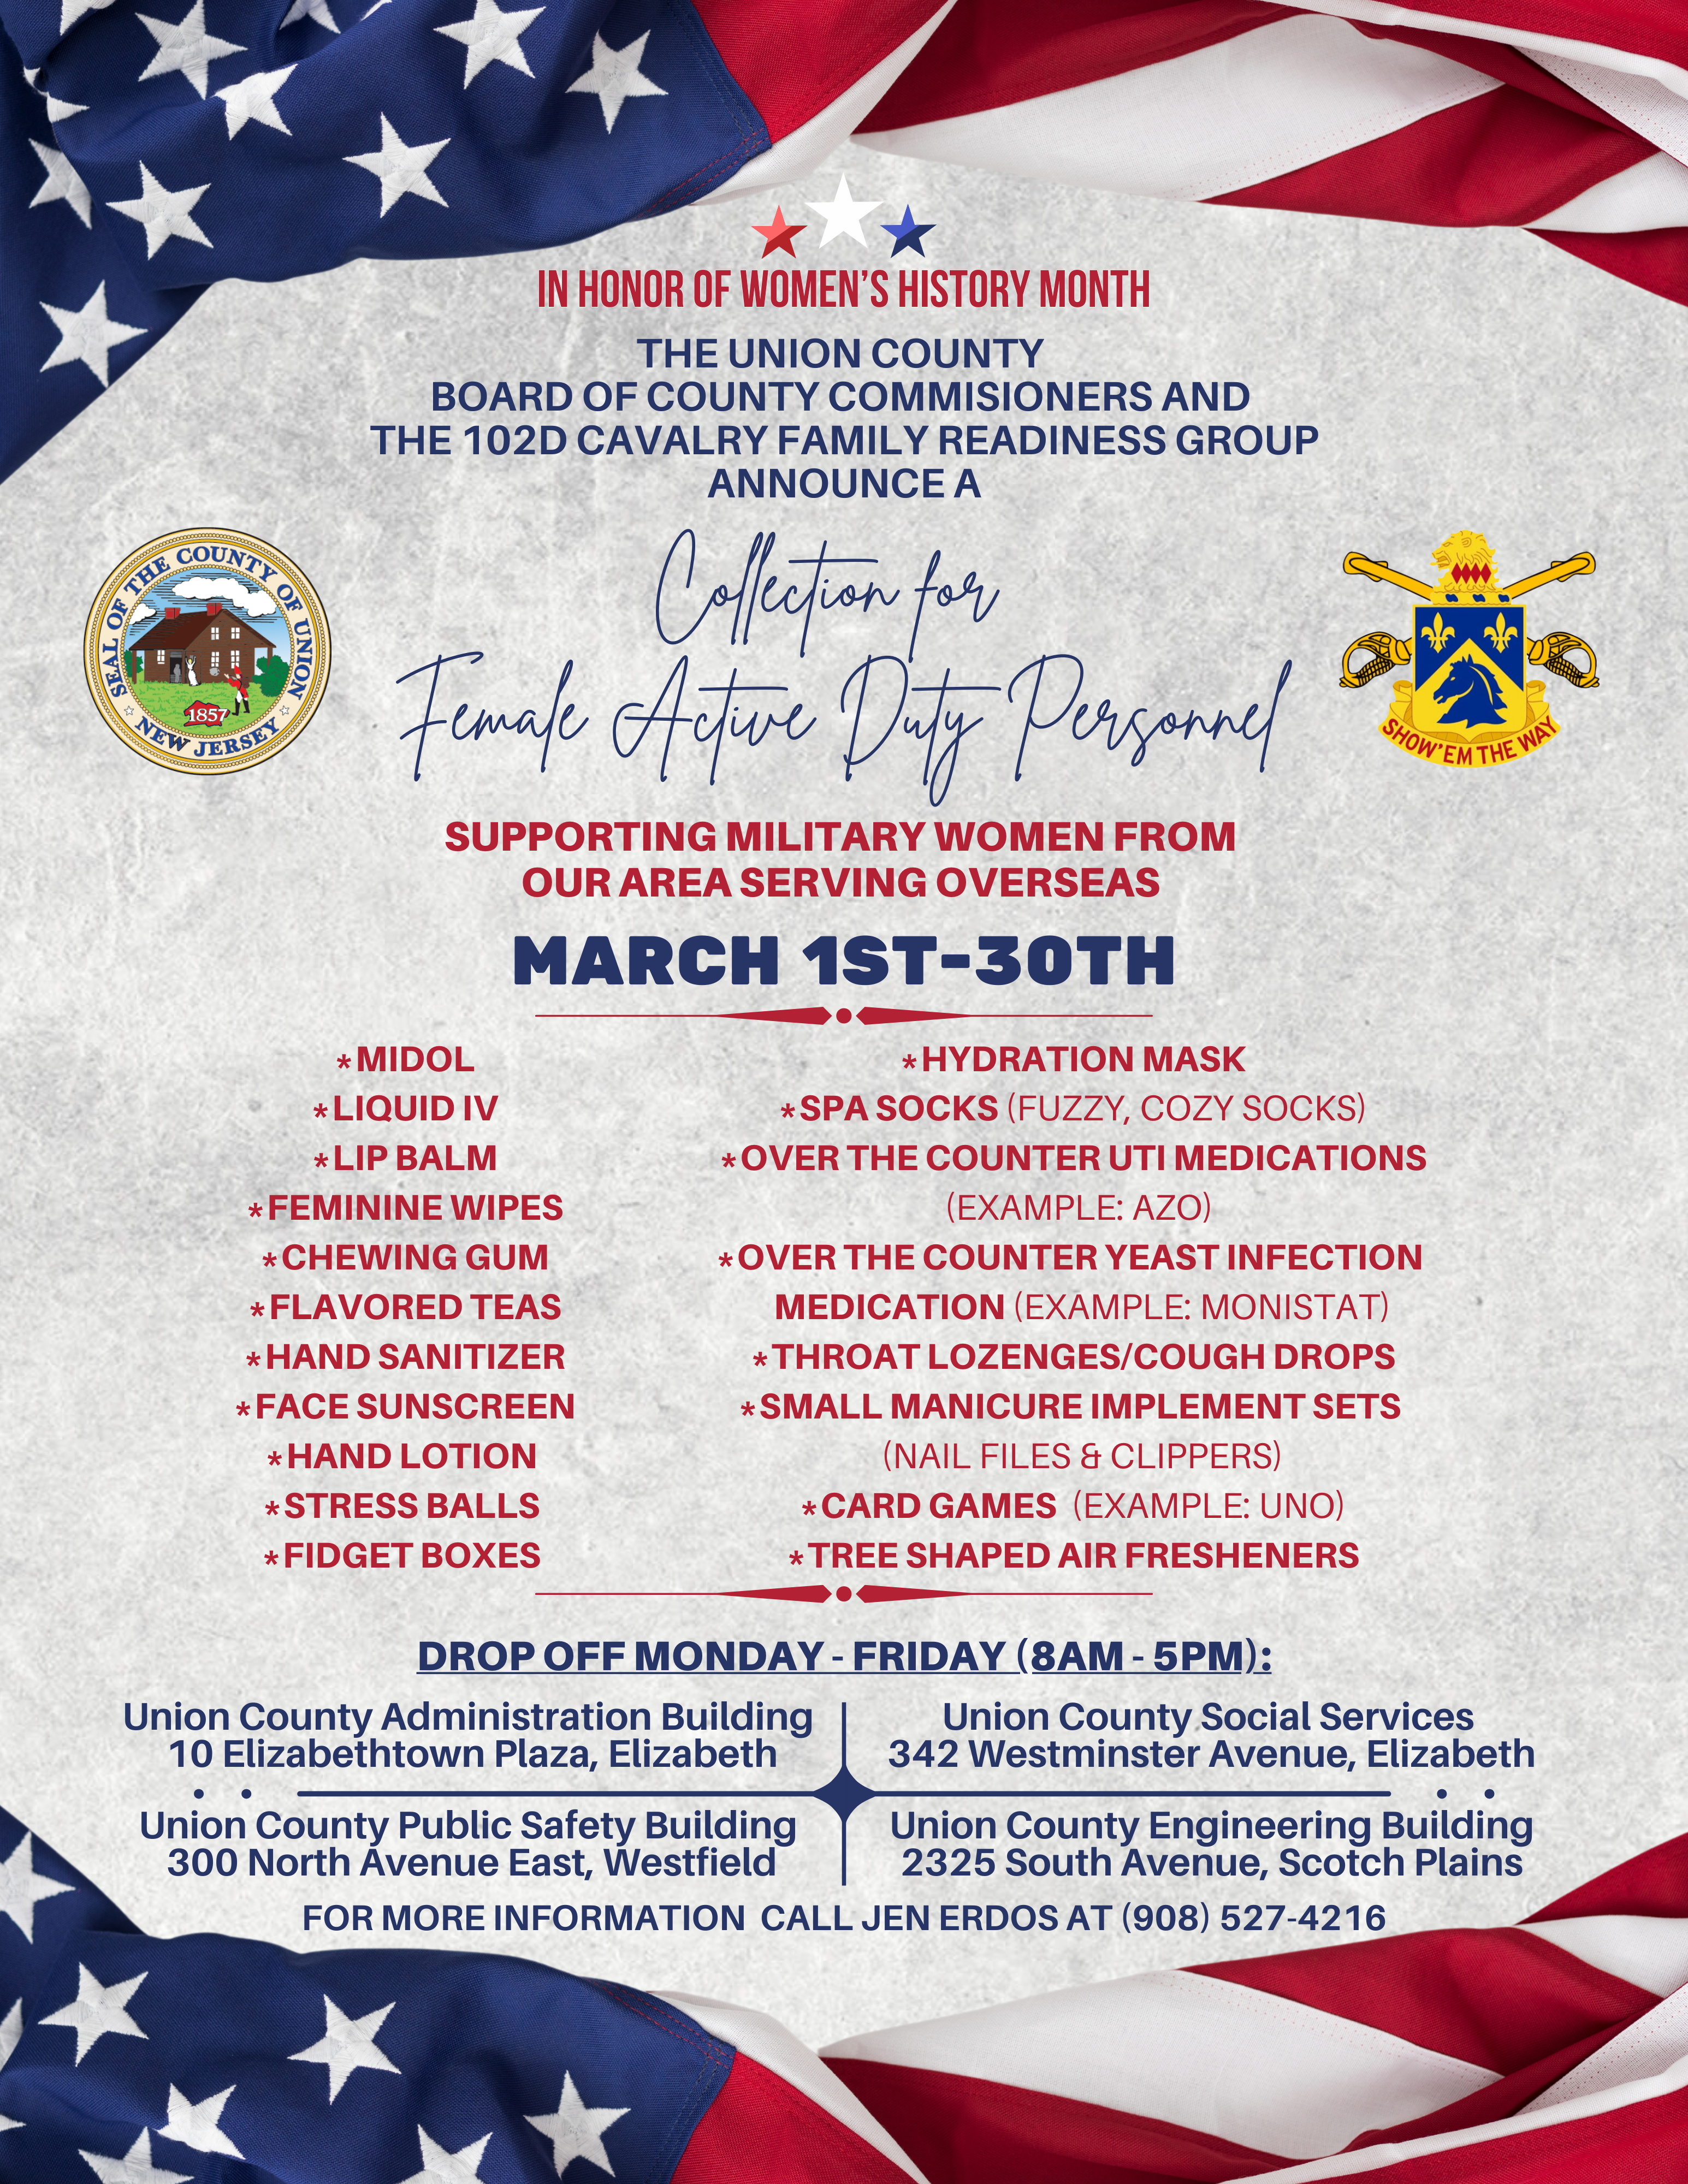 Union County Launches Collection Drive in Honor of Women’s History Month to Support Military Women Overseas